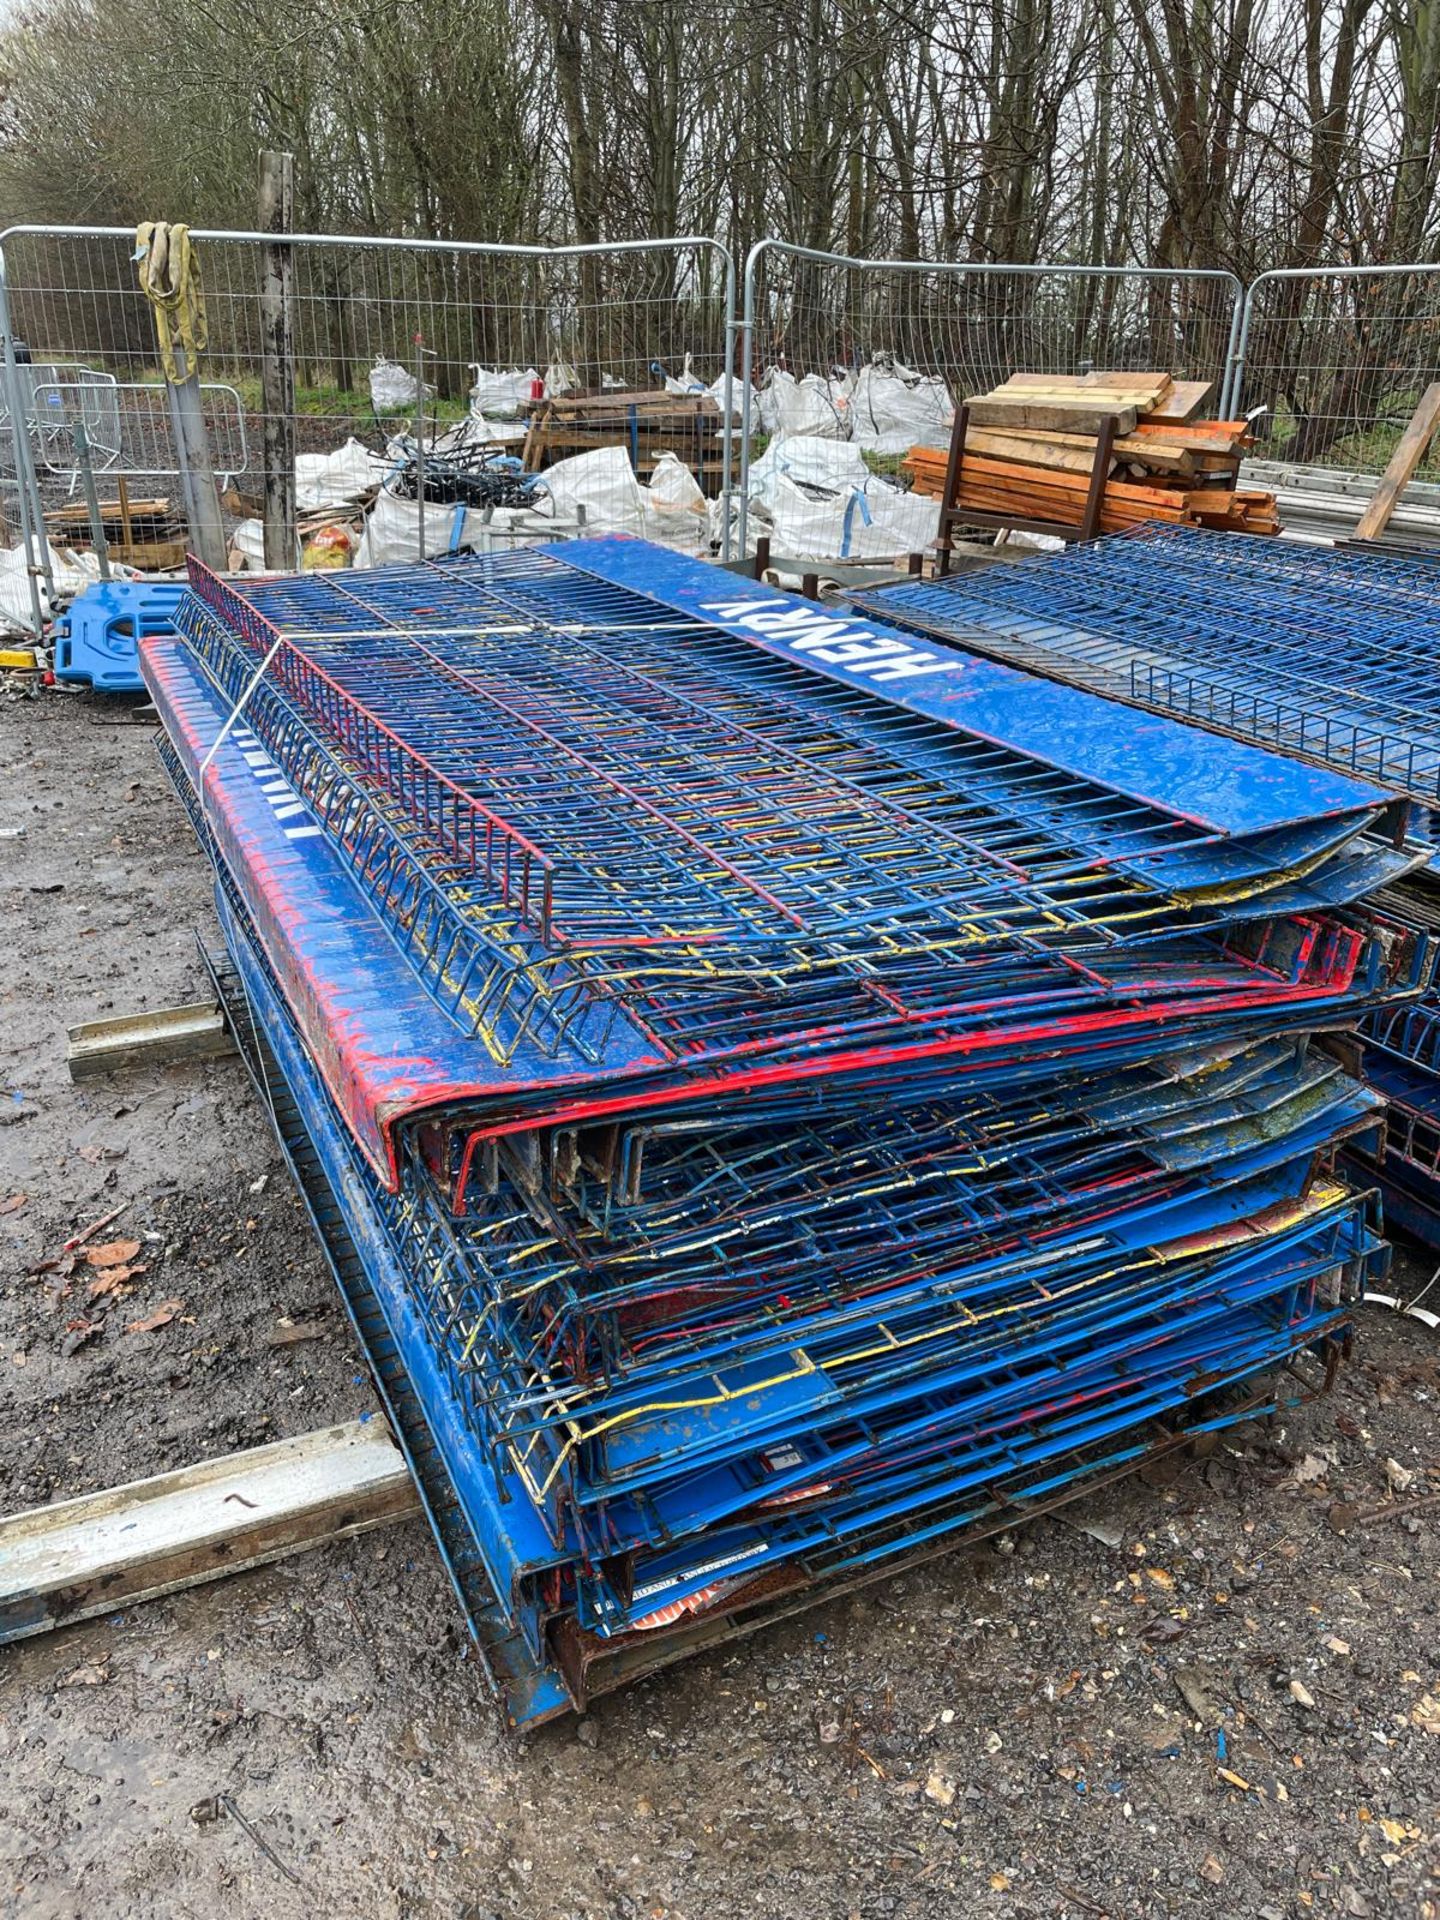 Approx (200) Combisafe 2.6m x 1.1m Steel Mesh Safety Barriers (4 x 50 barriers) and (50) Mixed Combi